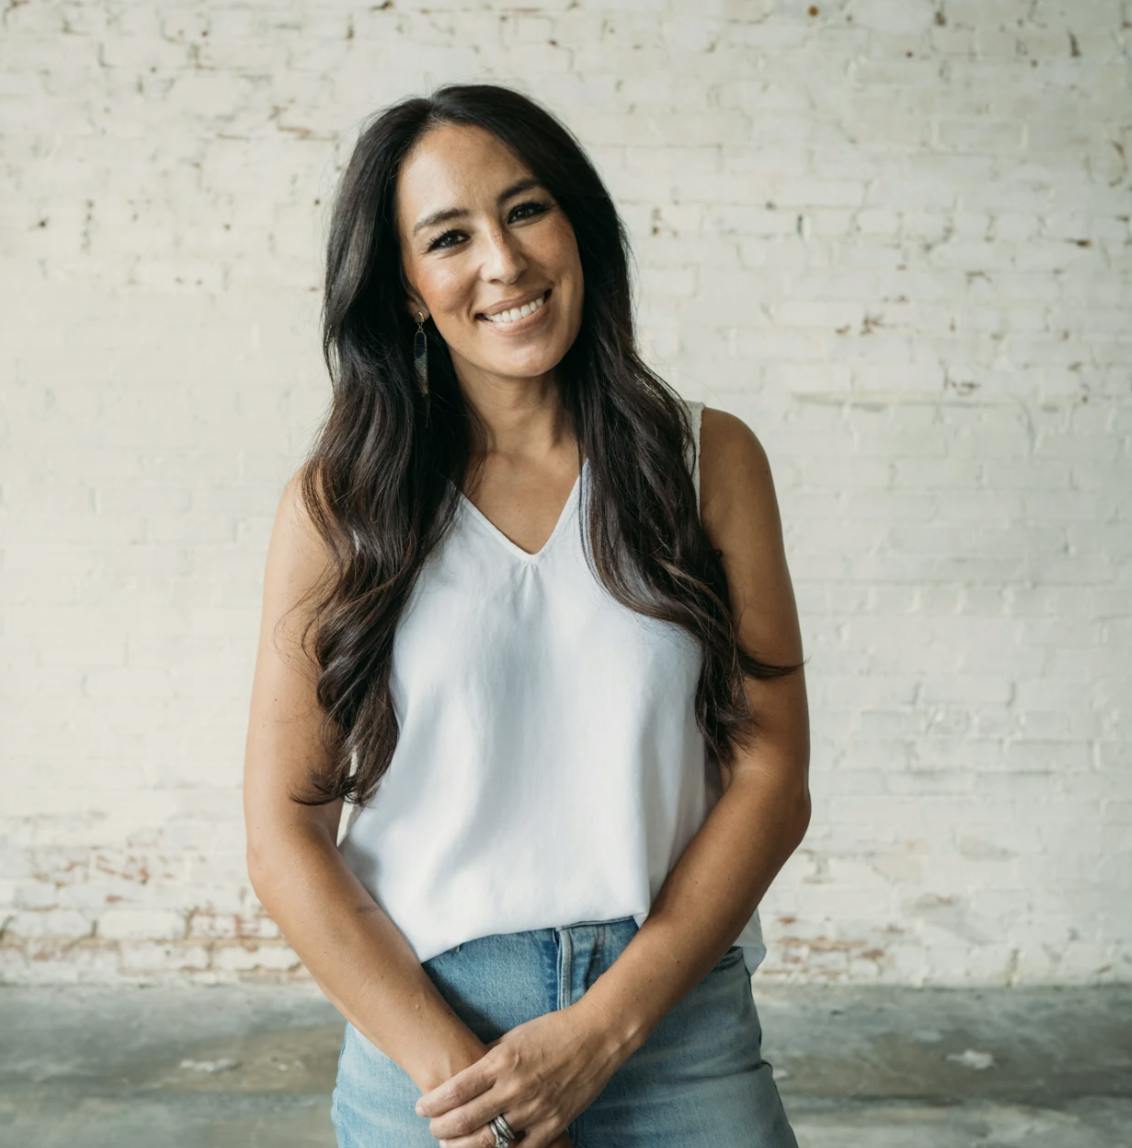 Joanna Gaines on Gardening, Ramen, and Bringing Family to the Table